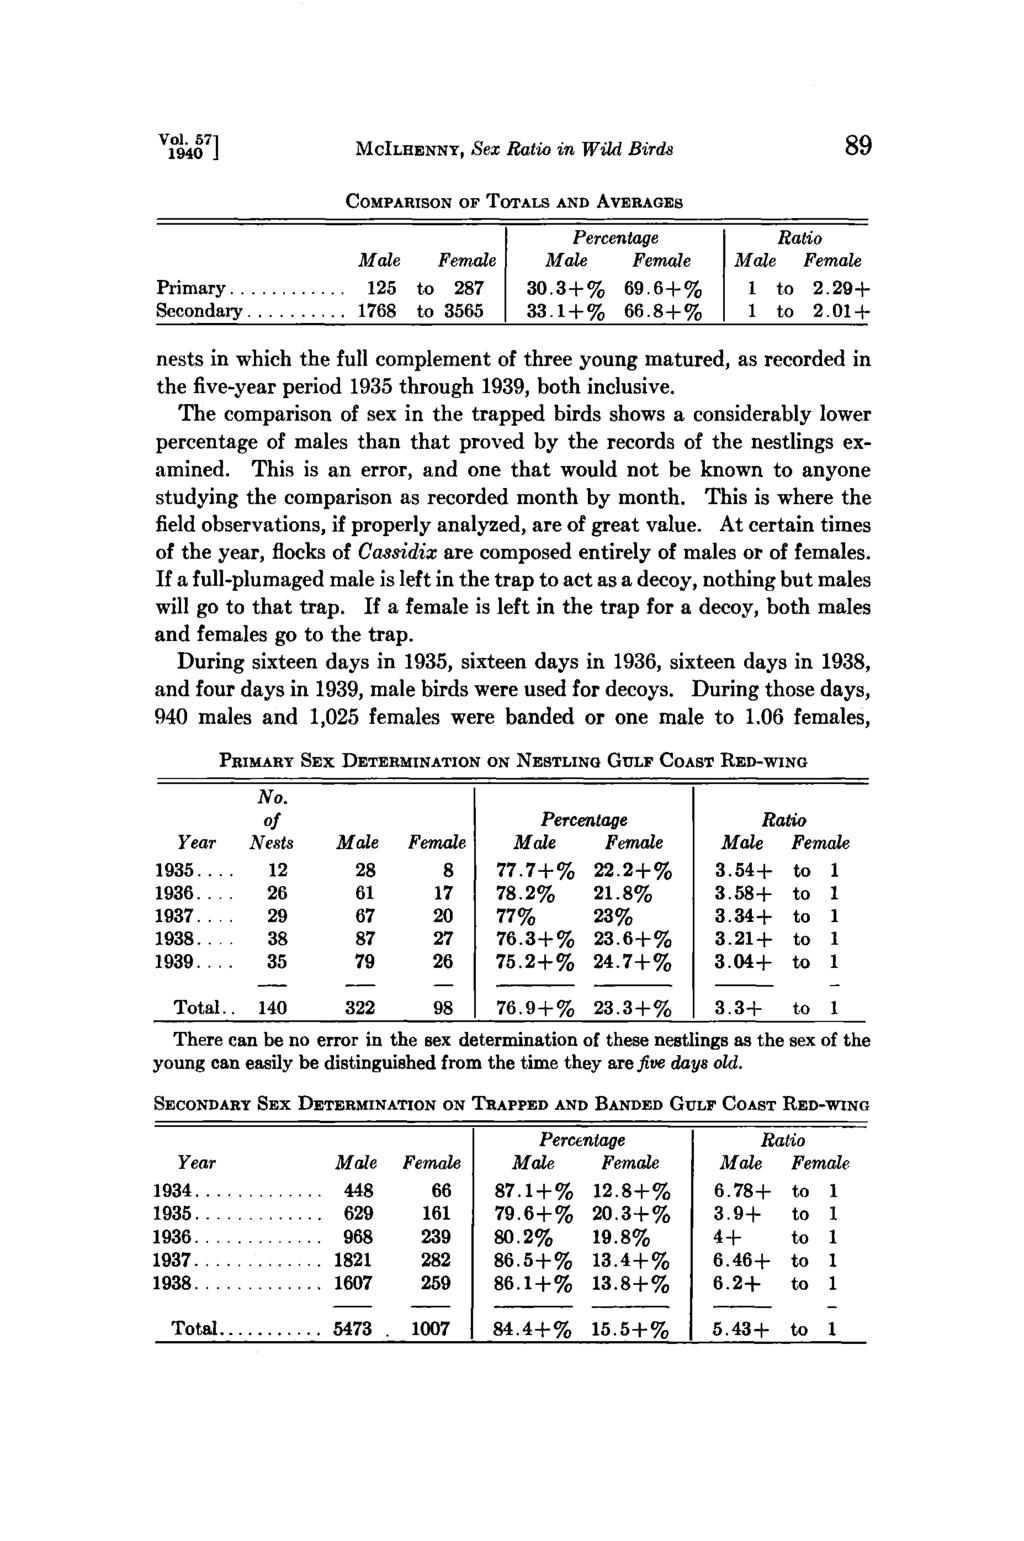 Vol. 57] 1940 J MclLHENNY Sex in Wild Birds 89 COMPARISON OF TOTALS AND AVERAGES Primary... 125 to 287 30.3+% 69.6+% 1 to 2.29+ Secondary... 1768 to 3565 33.1+% 66.8+% 1 to 2.